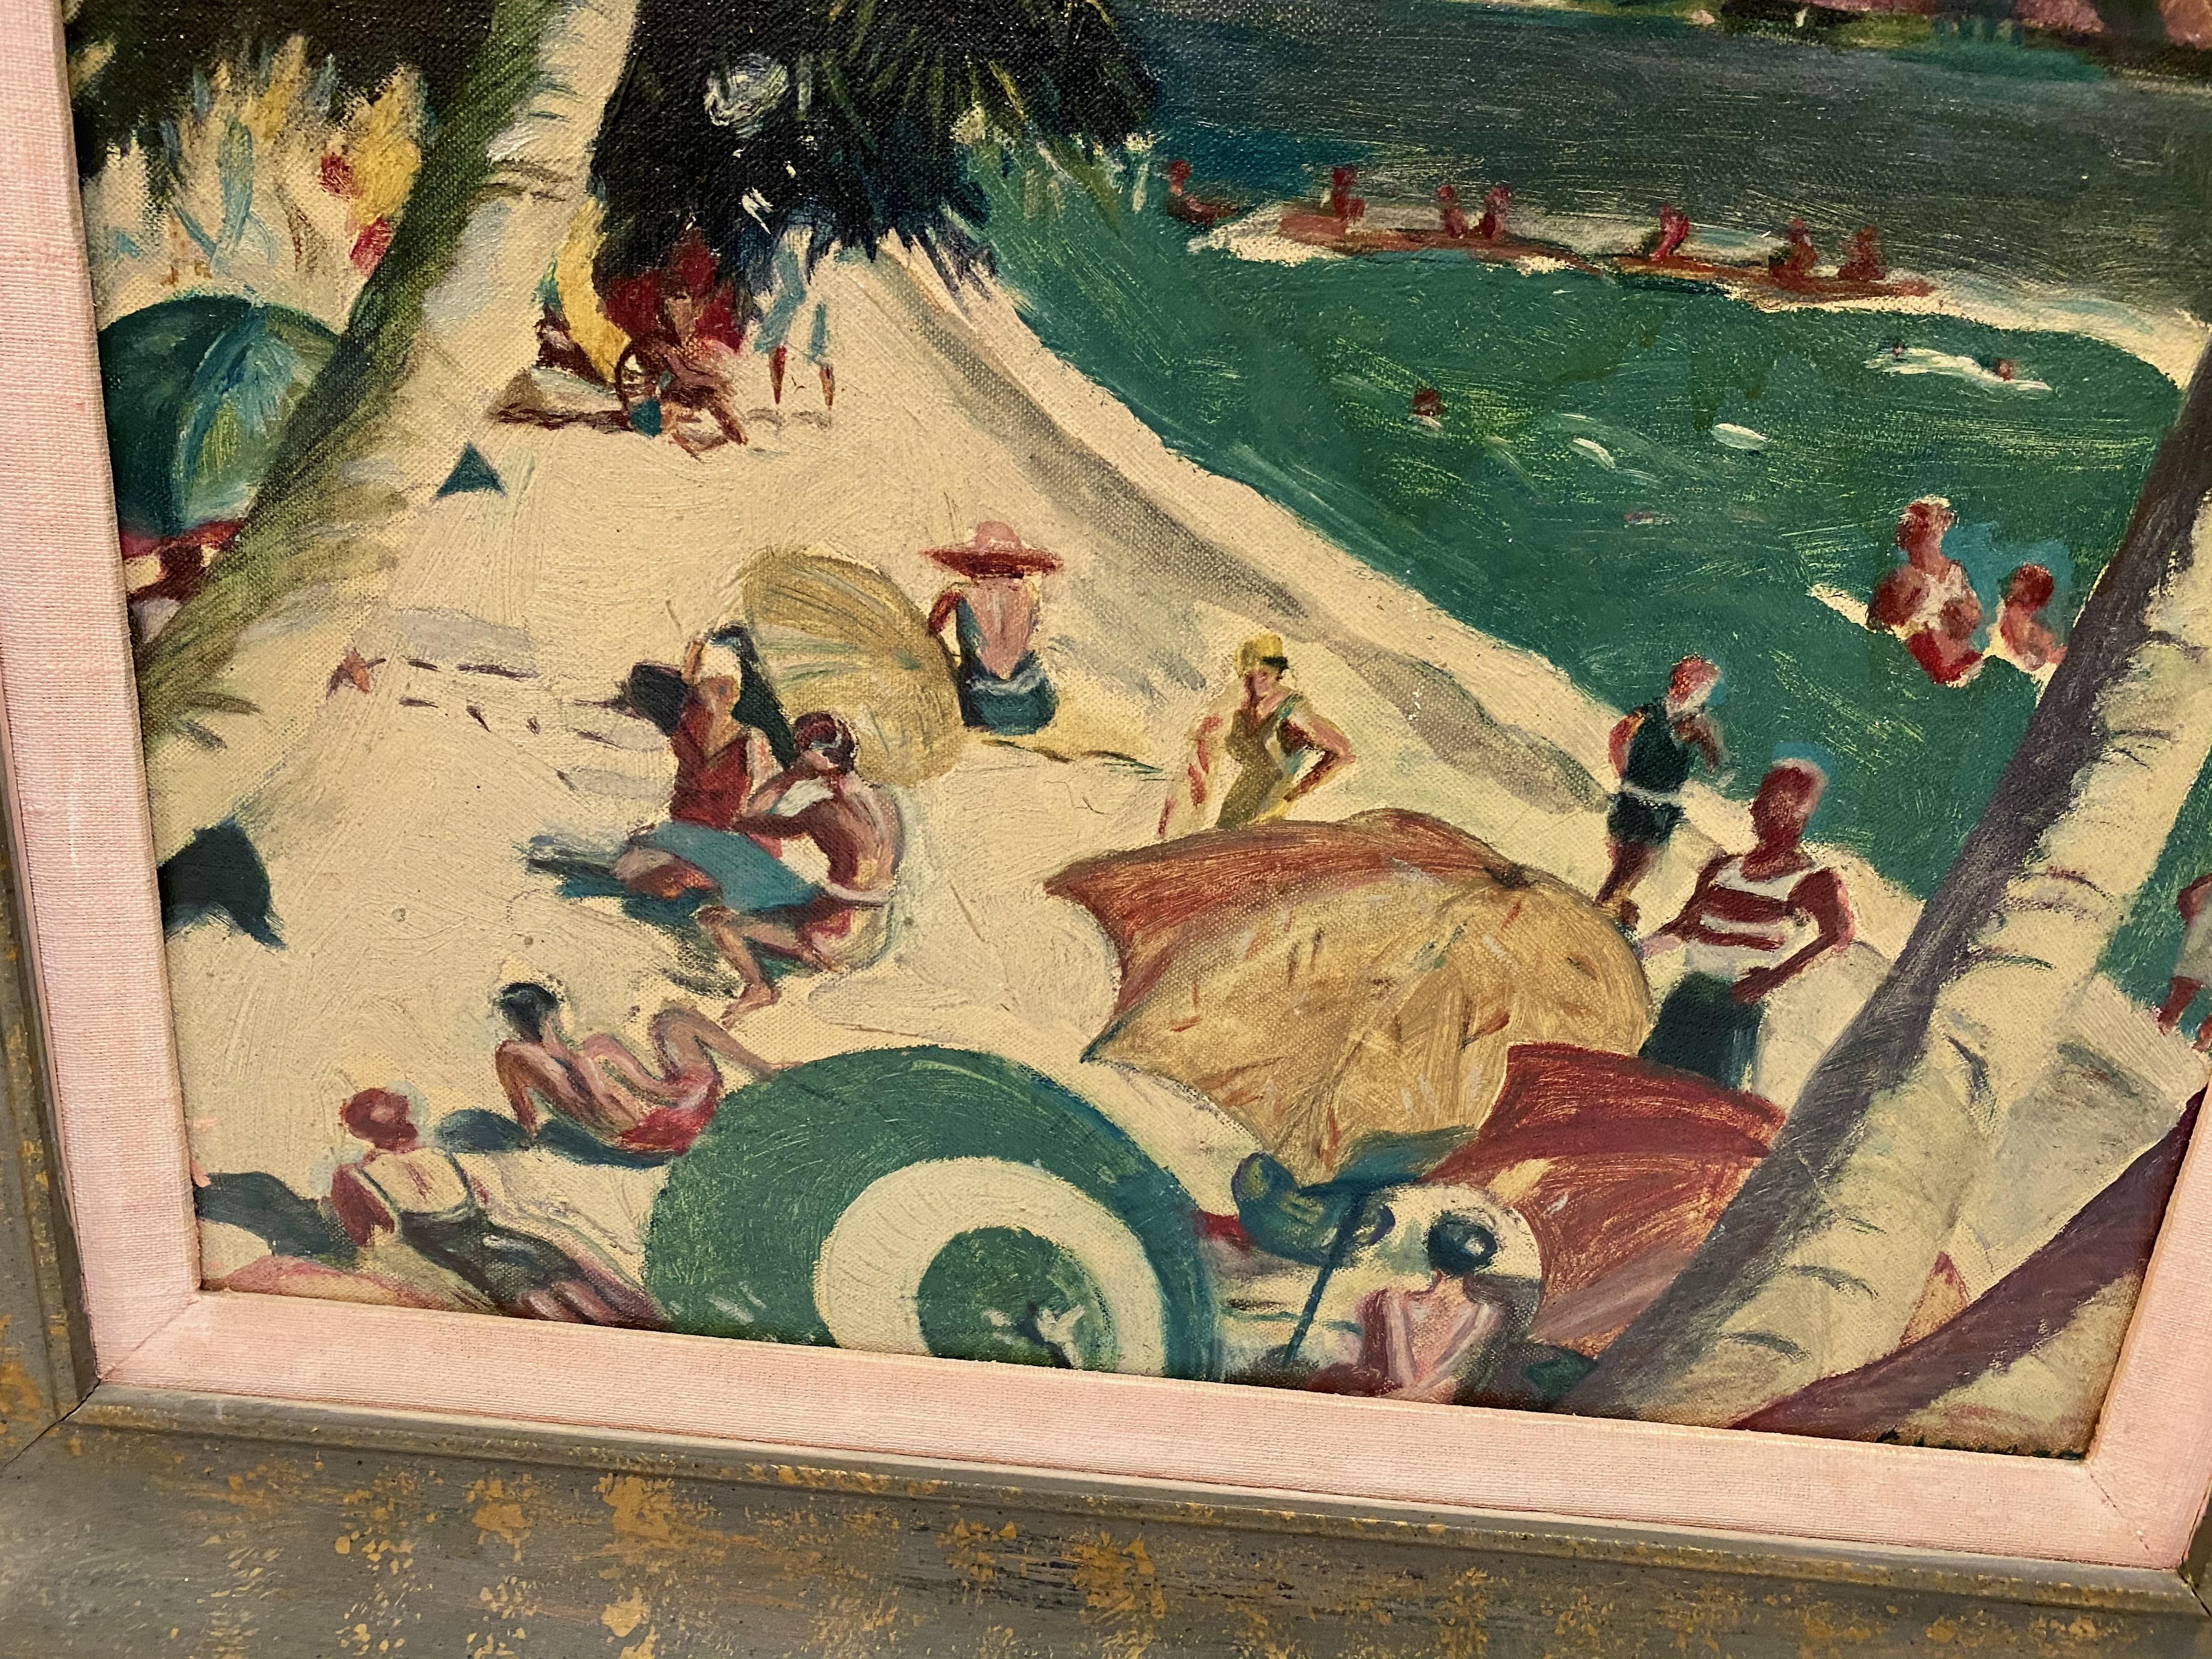 This is a charming painting of a mid-century Hawaiian Beach Scene. Note the surfer in the background. The painting is in overall good condition as is the frame.